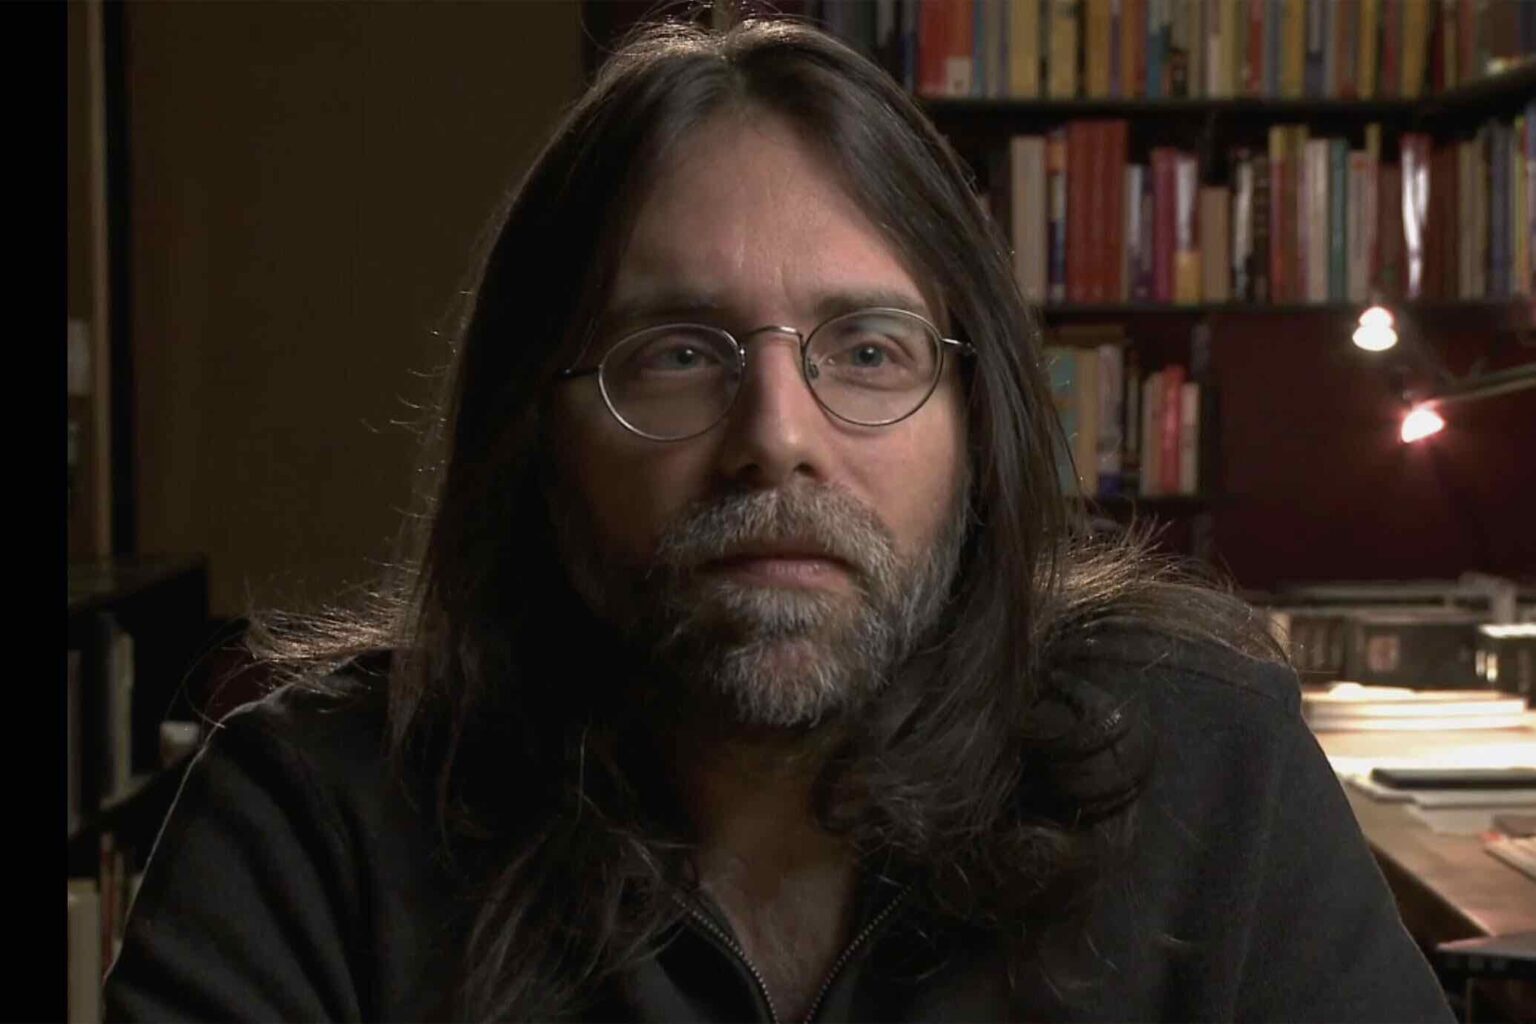 Why didn't therapists put an end to the NXIVM cult? Here’s why Keith Raniere banned therapists from all NXIVM events.